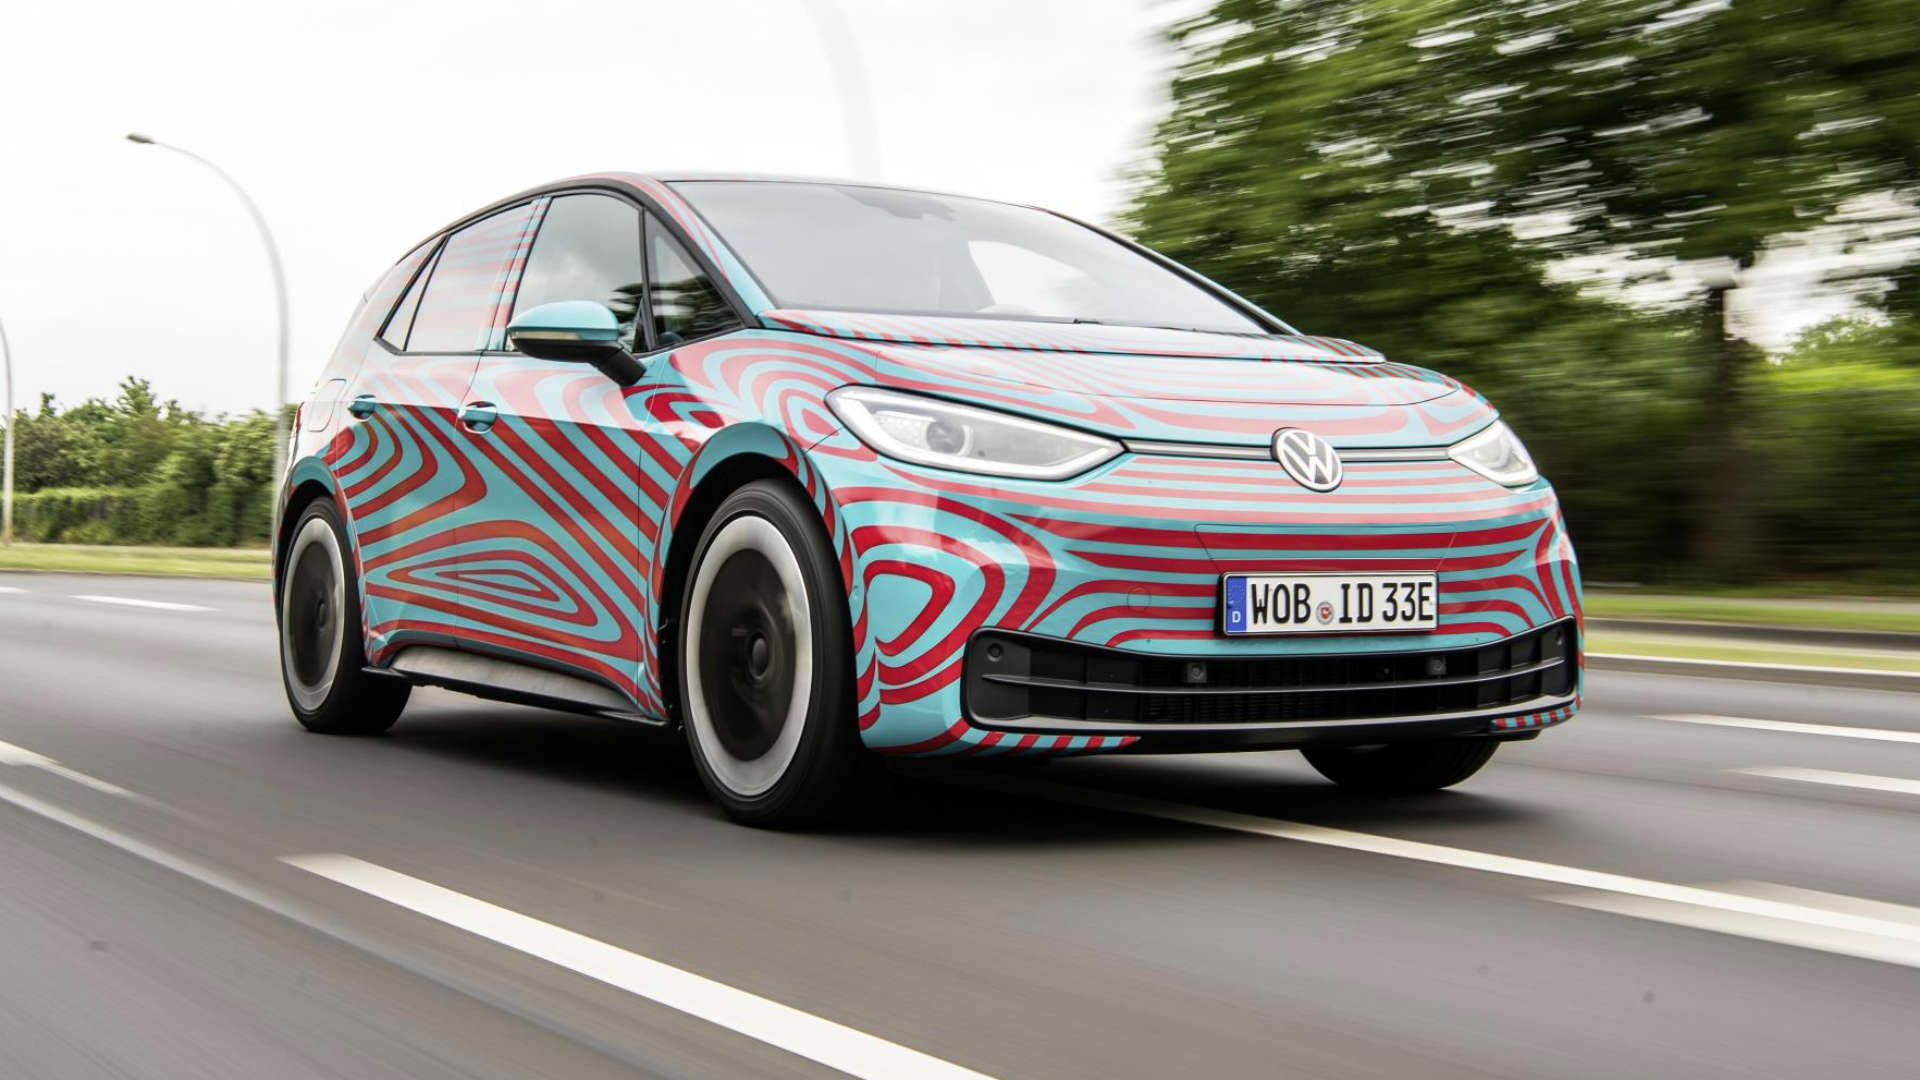 The electric cars coming soon to take on Tesla